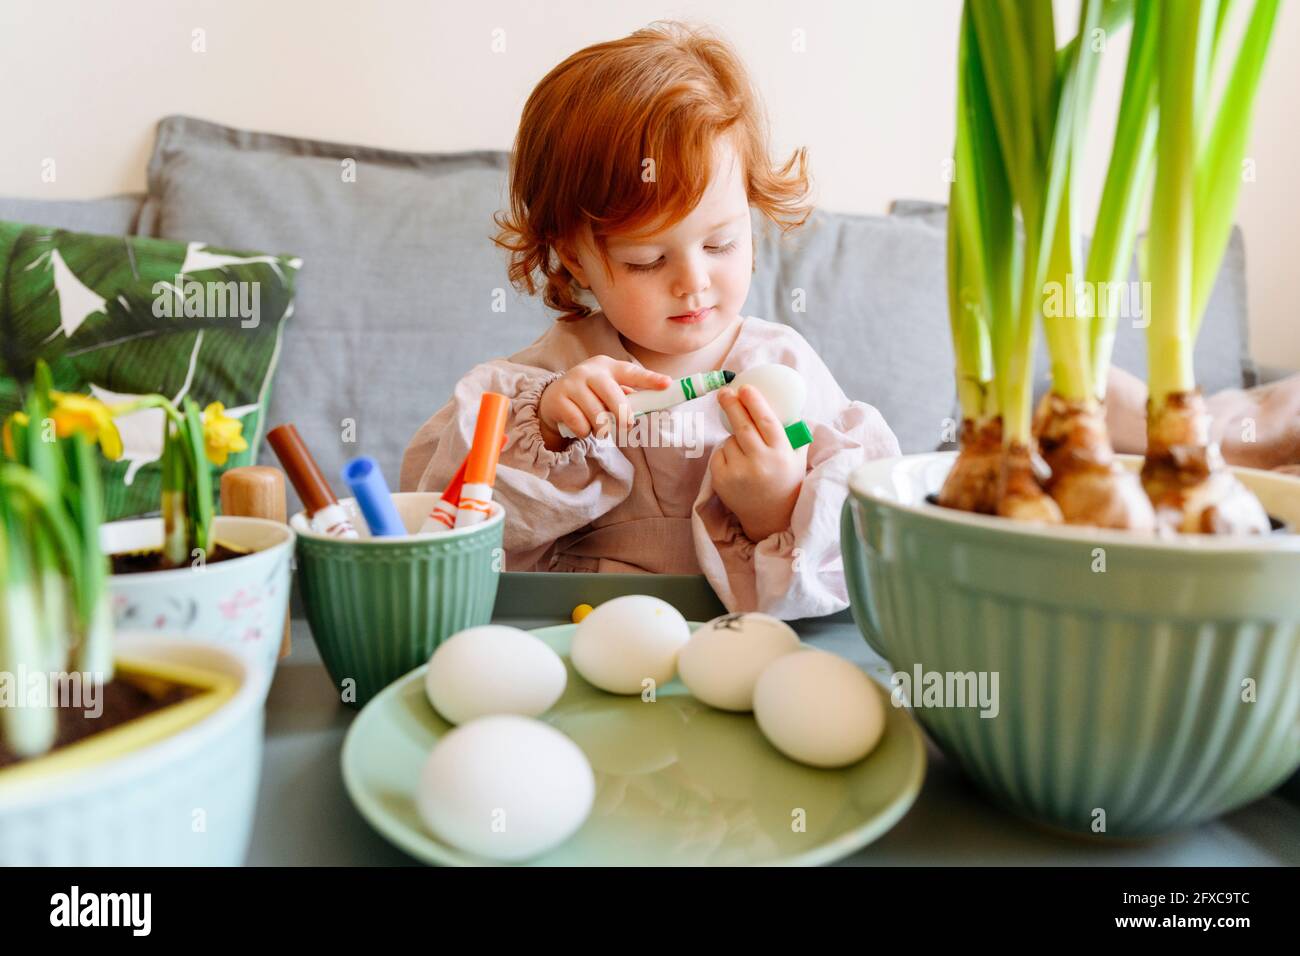 Girl coloring egg during Easter at home Stock Photo